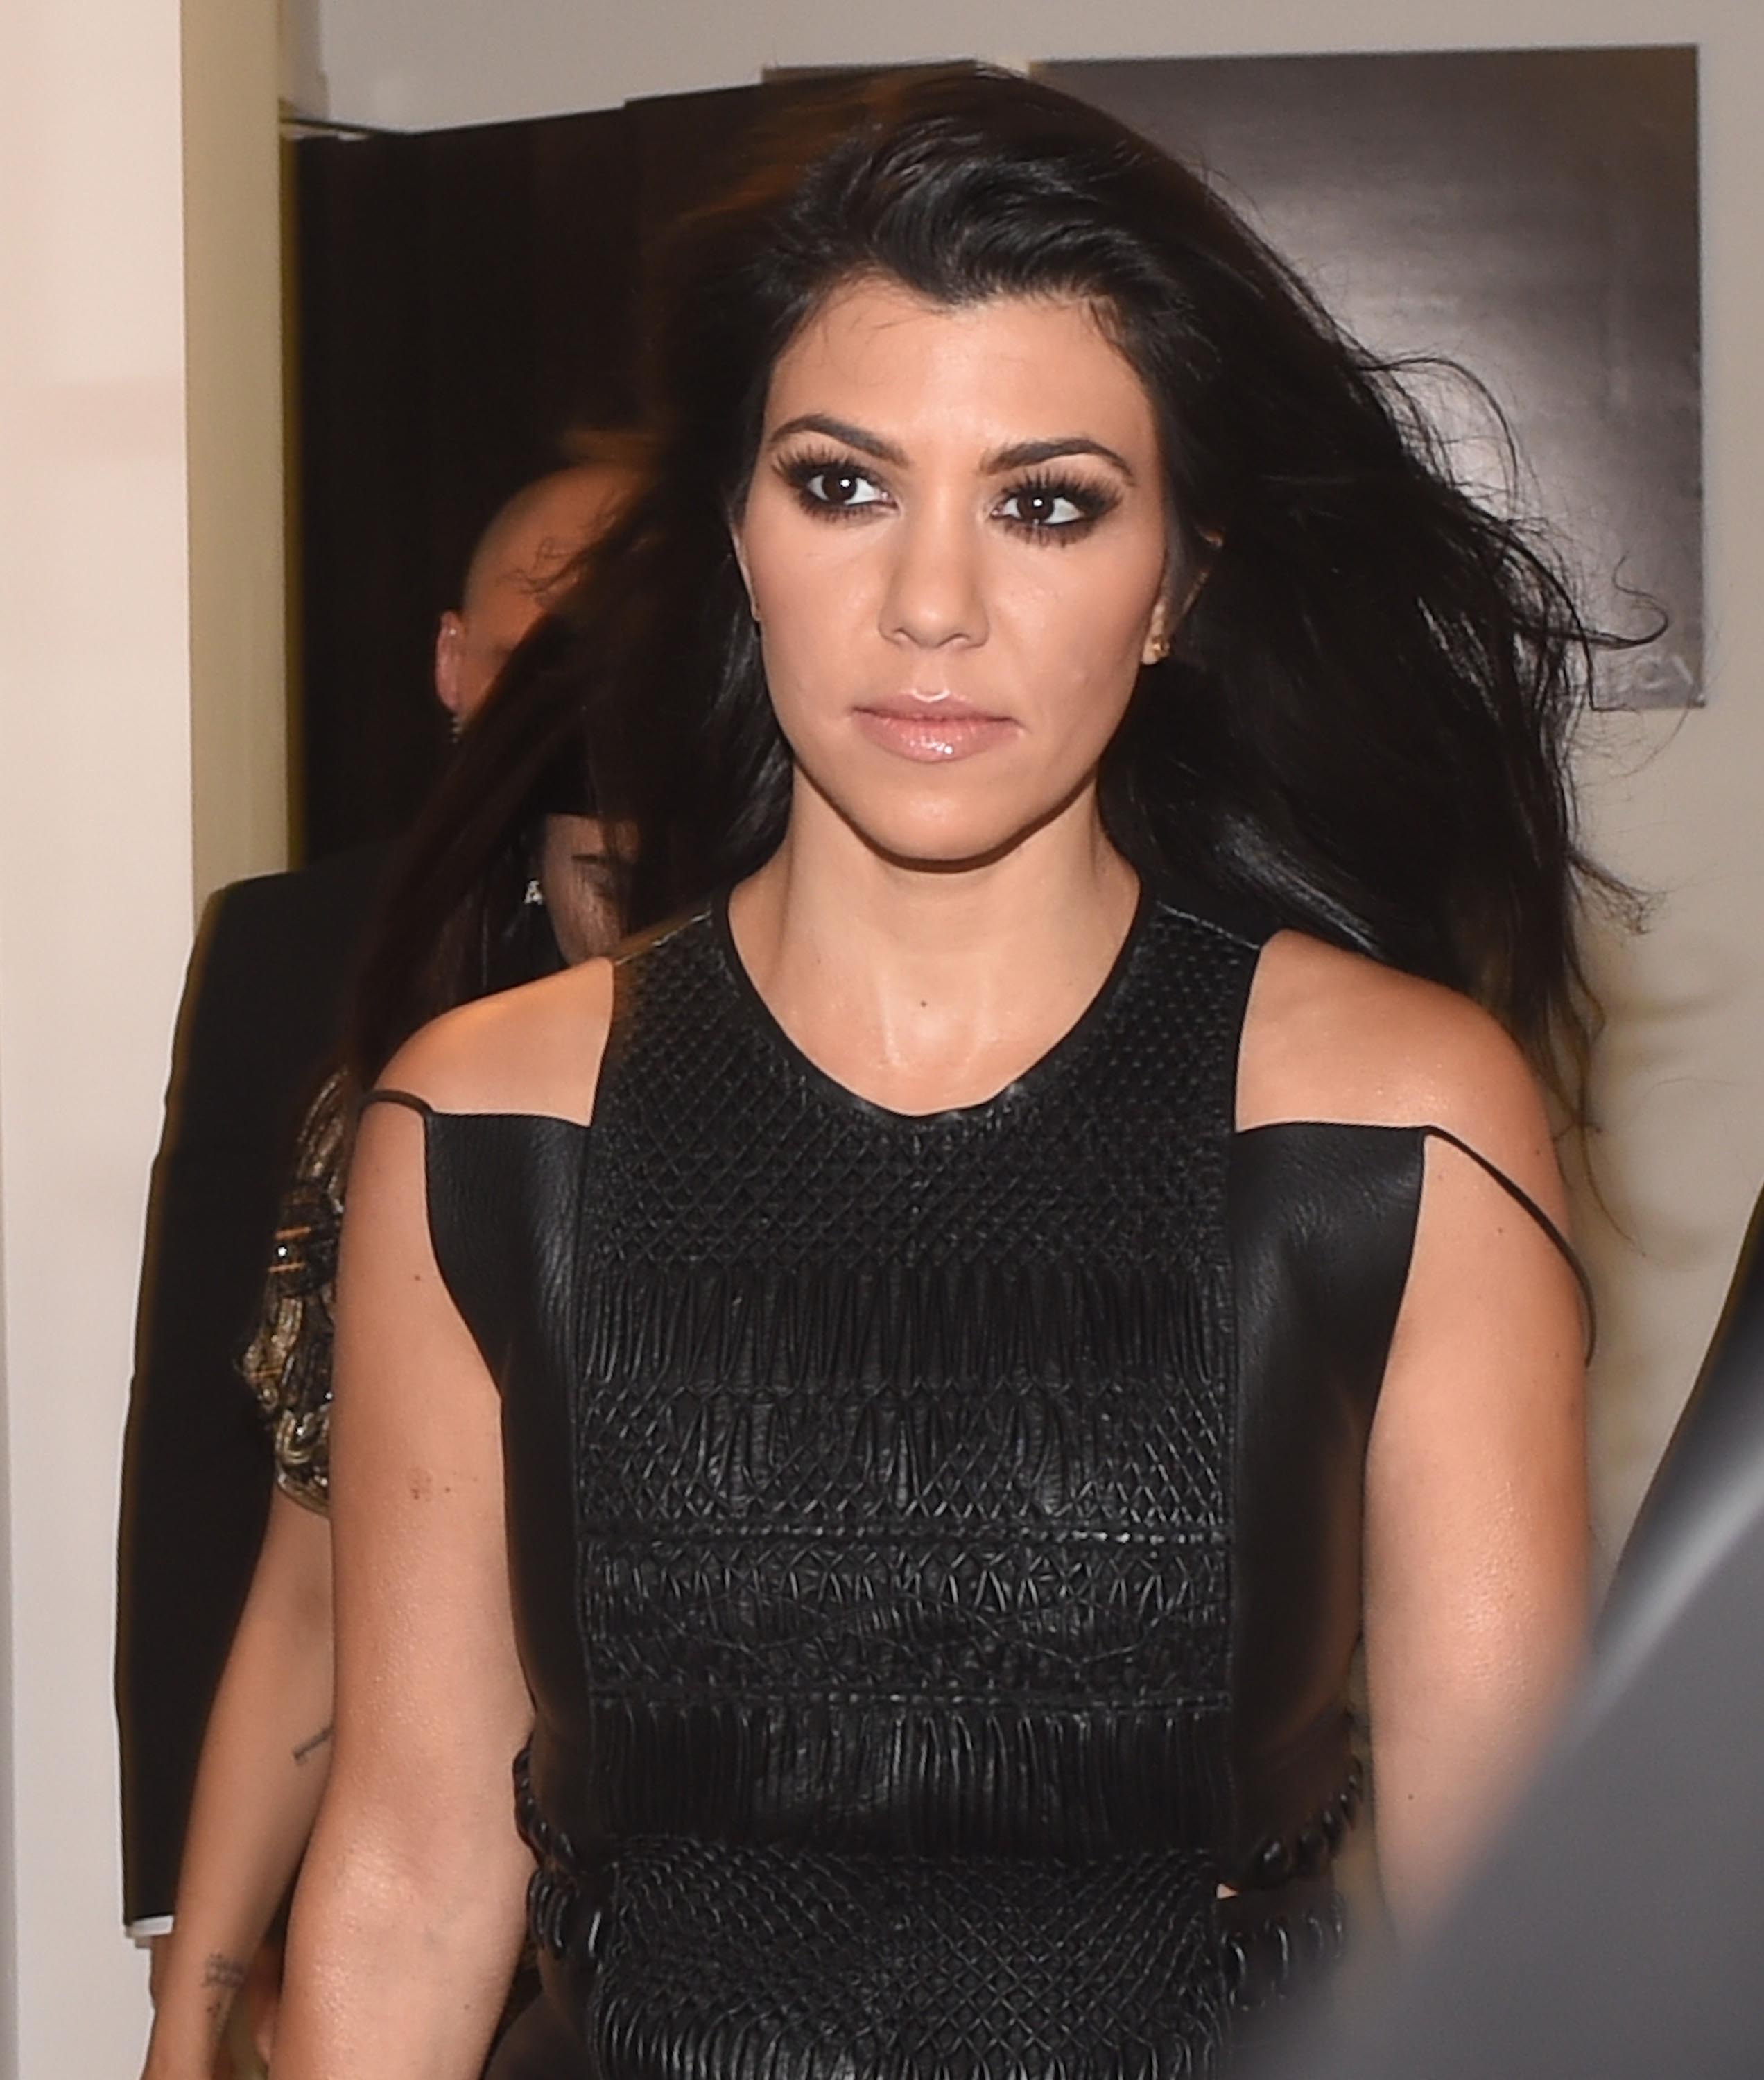 Kourtney Kardashian out and about in London